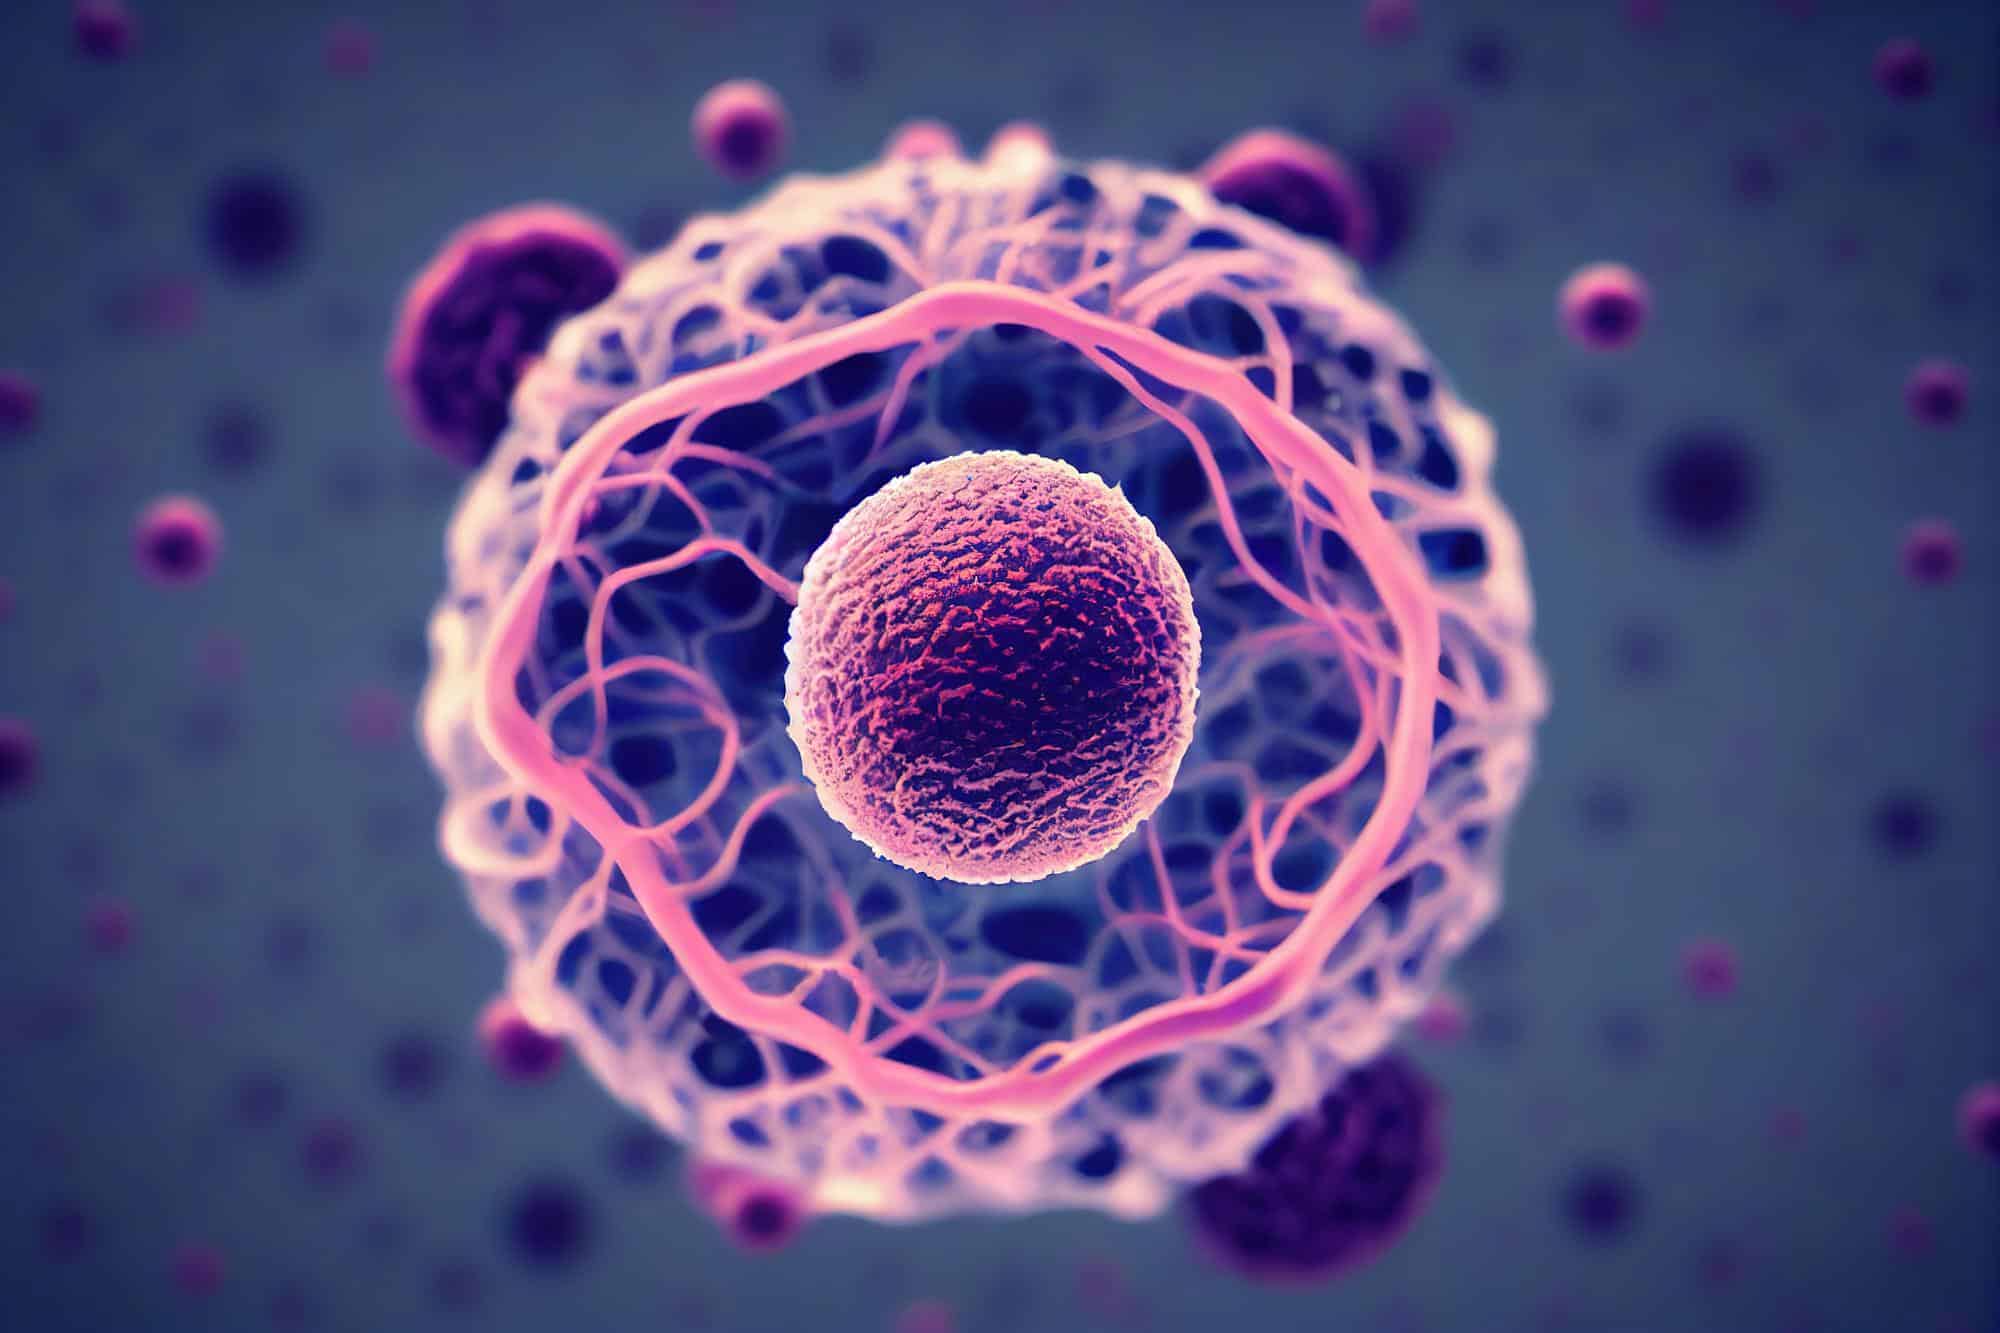 Image showing cancer cells